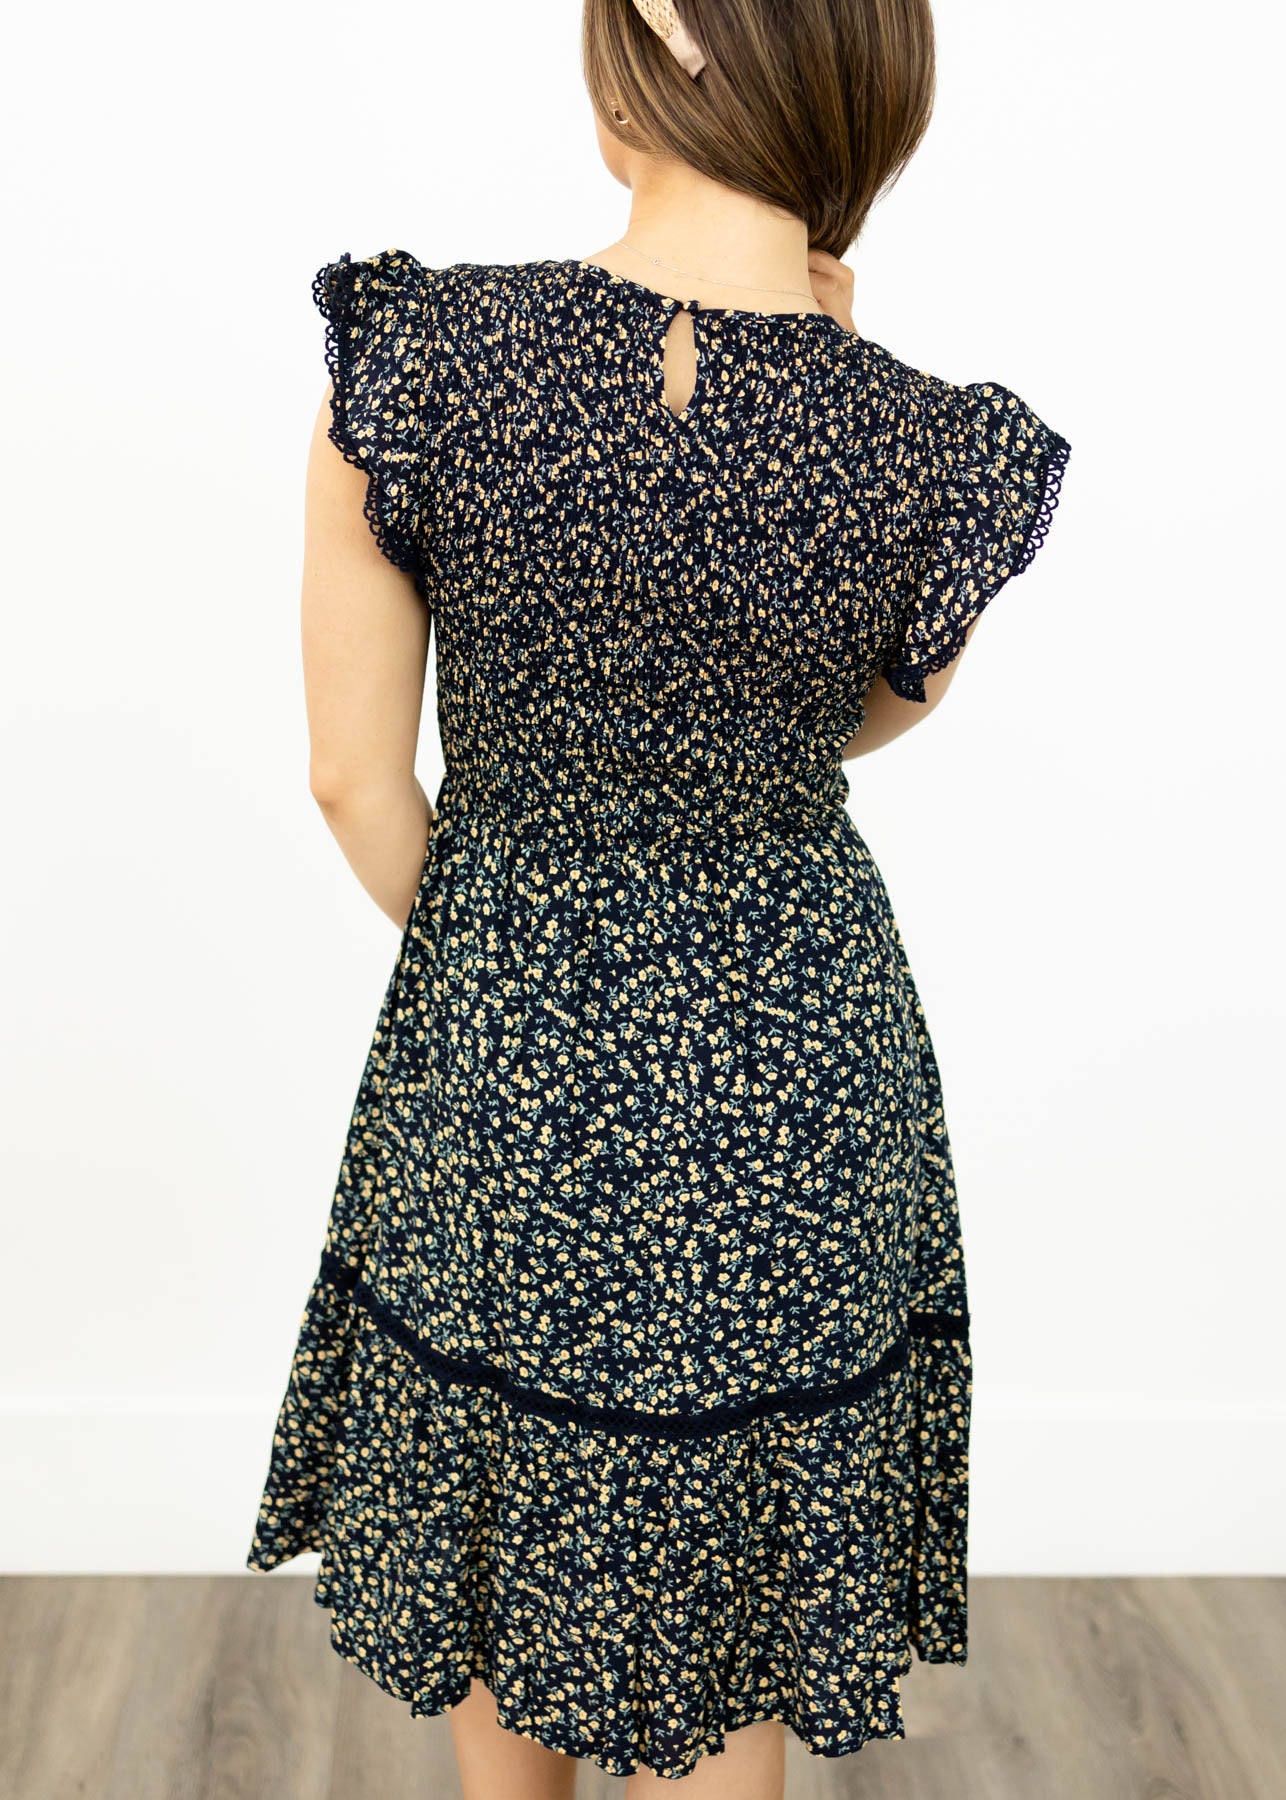 Back view of a navy floral dress